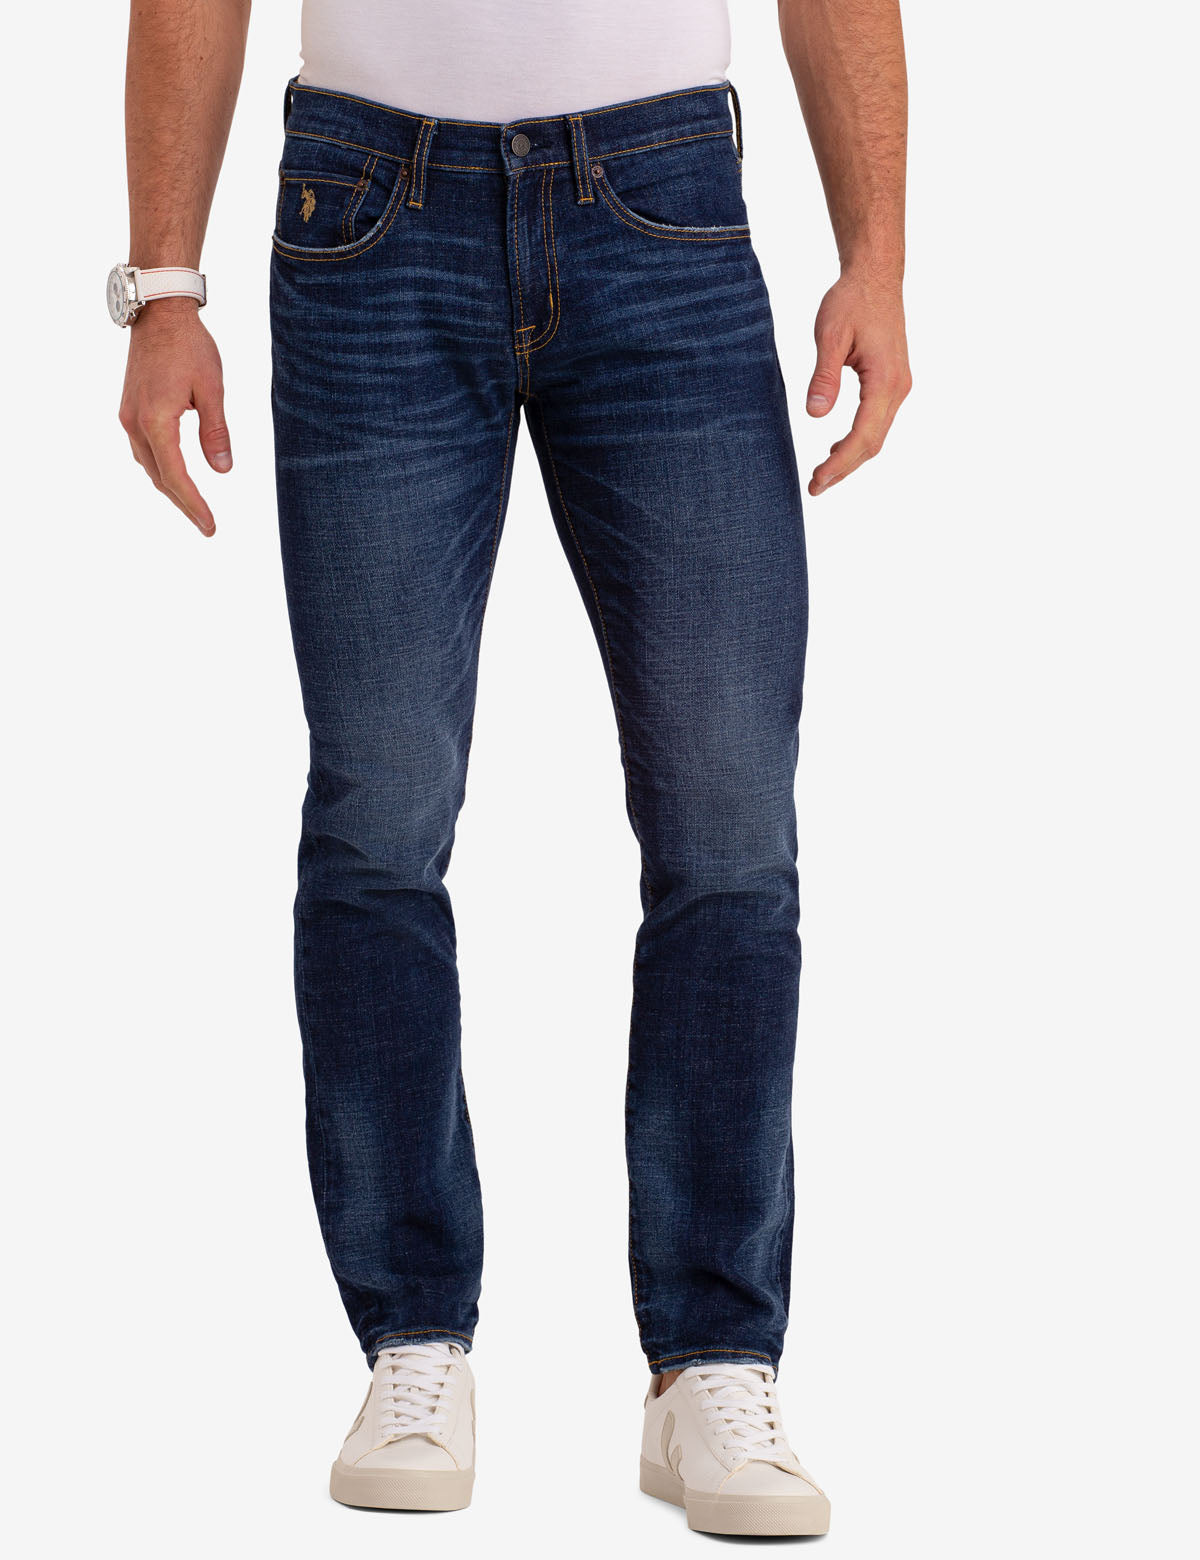 Slim Fit Washed Us Polo Jeans For Mens at Rs 1200/piece in Angul